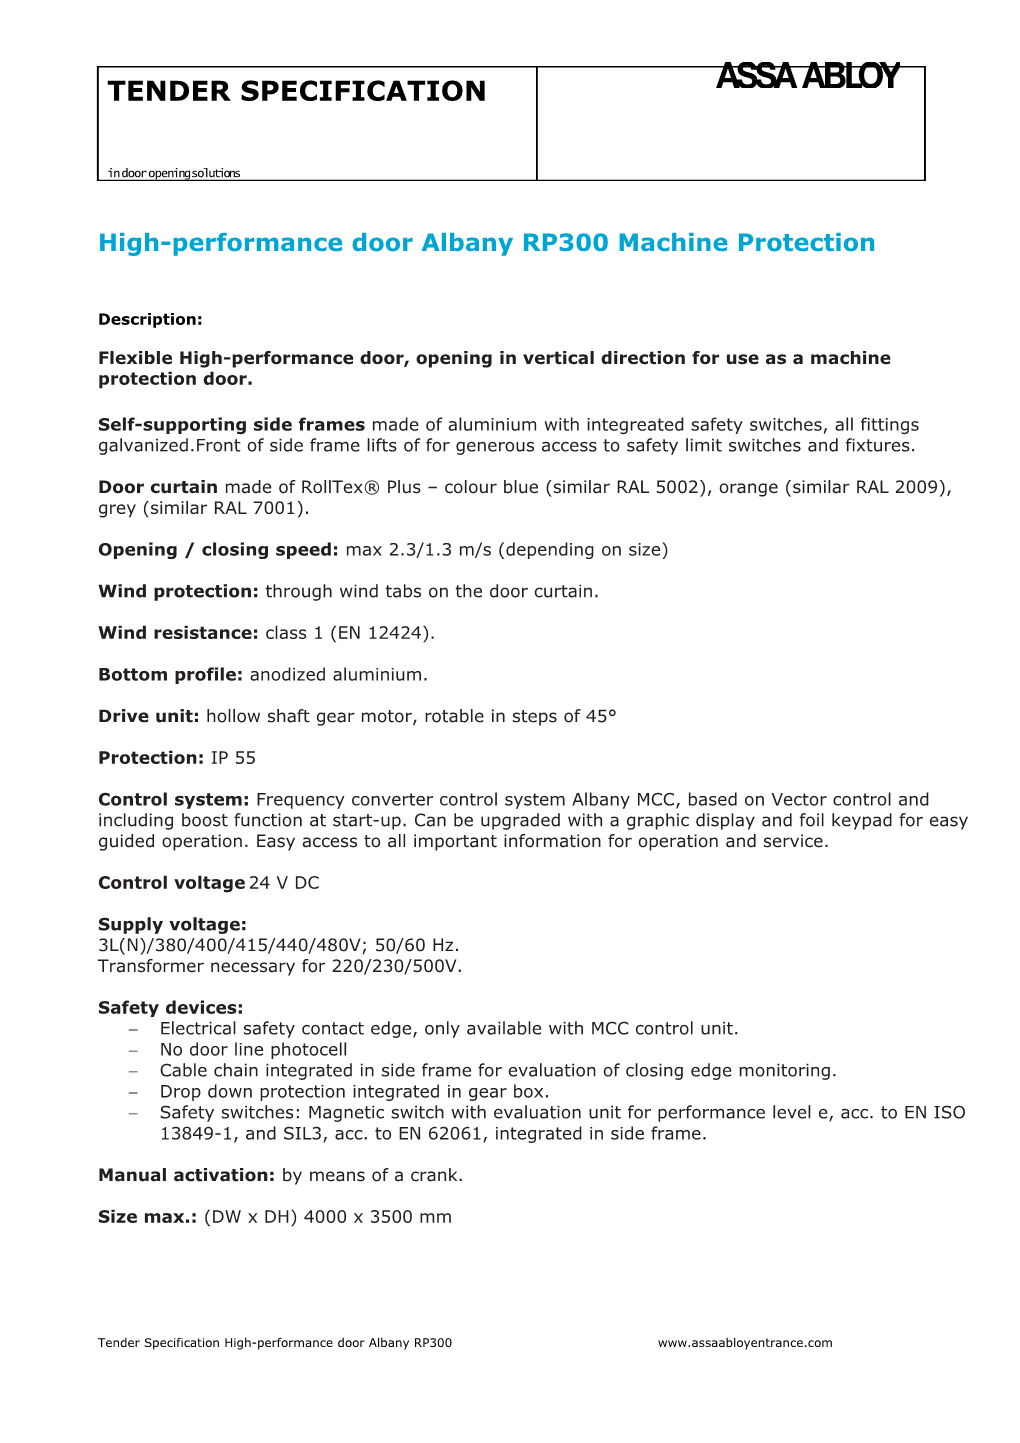 High-Performance Door Albany RP300 Machine Protection